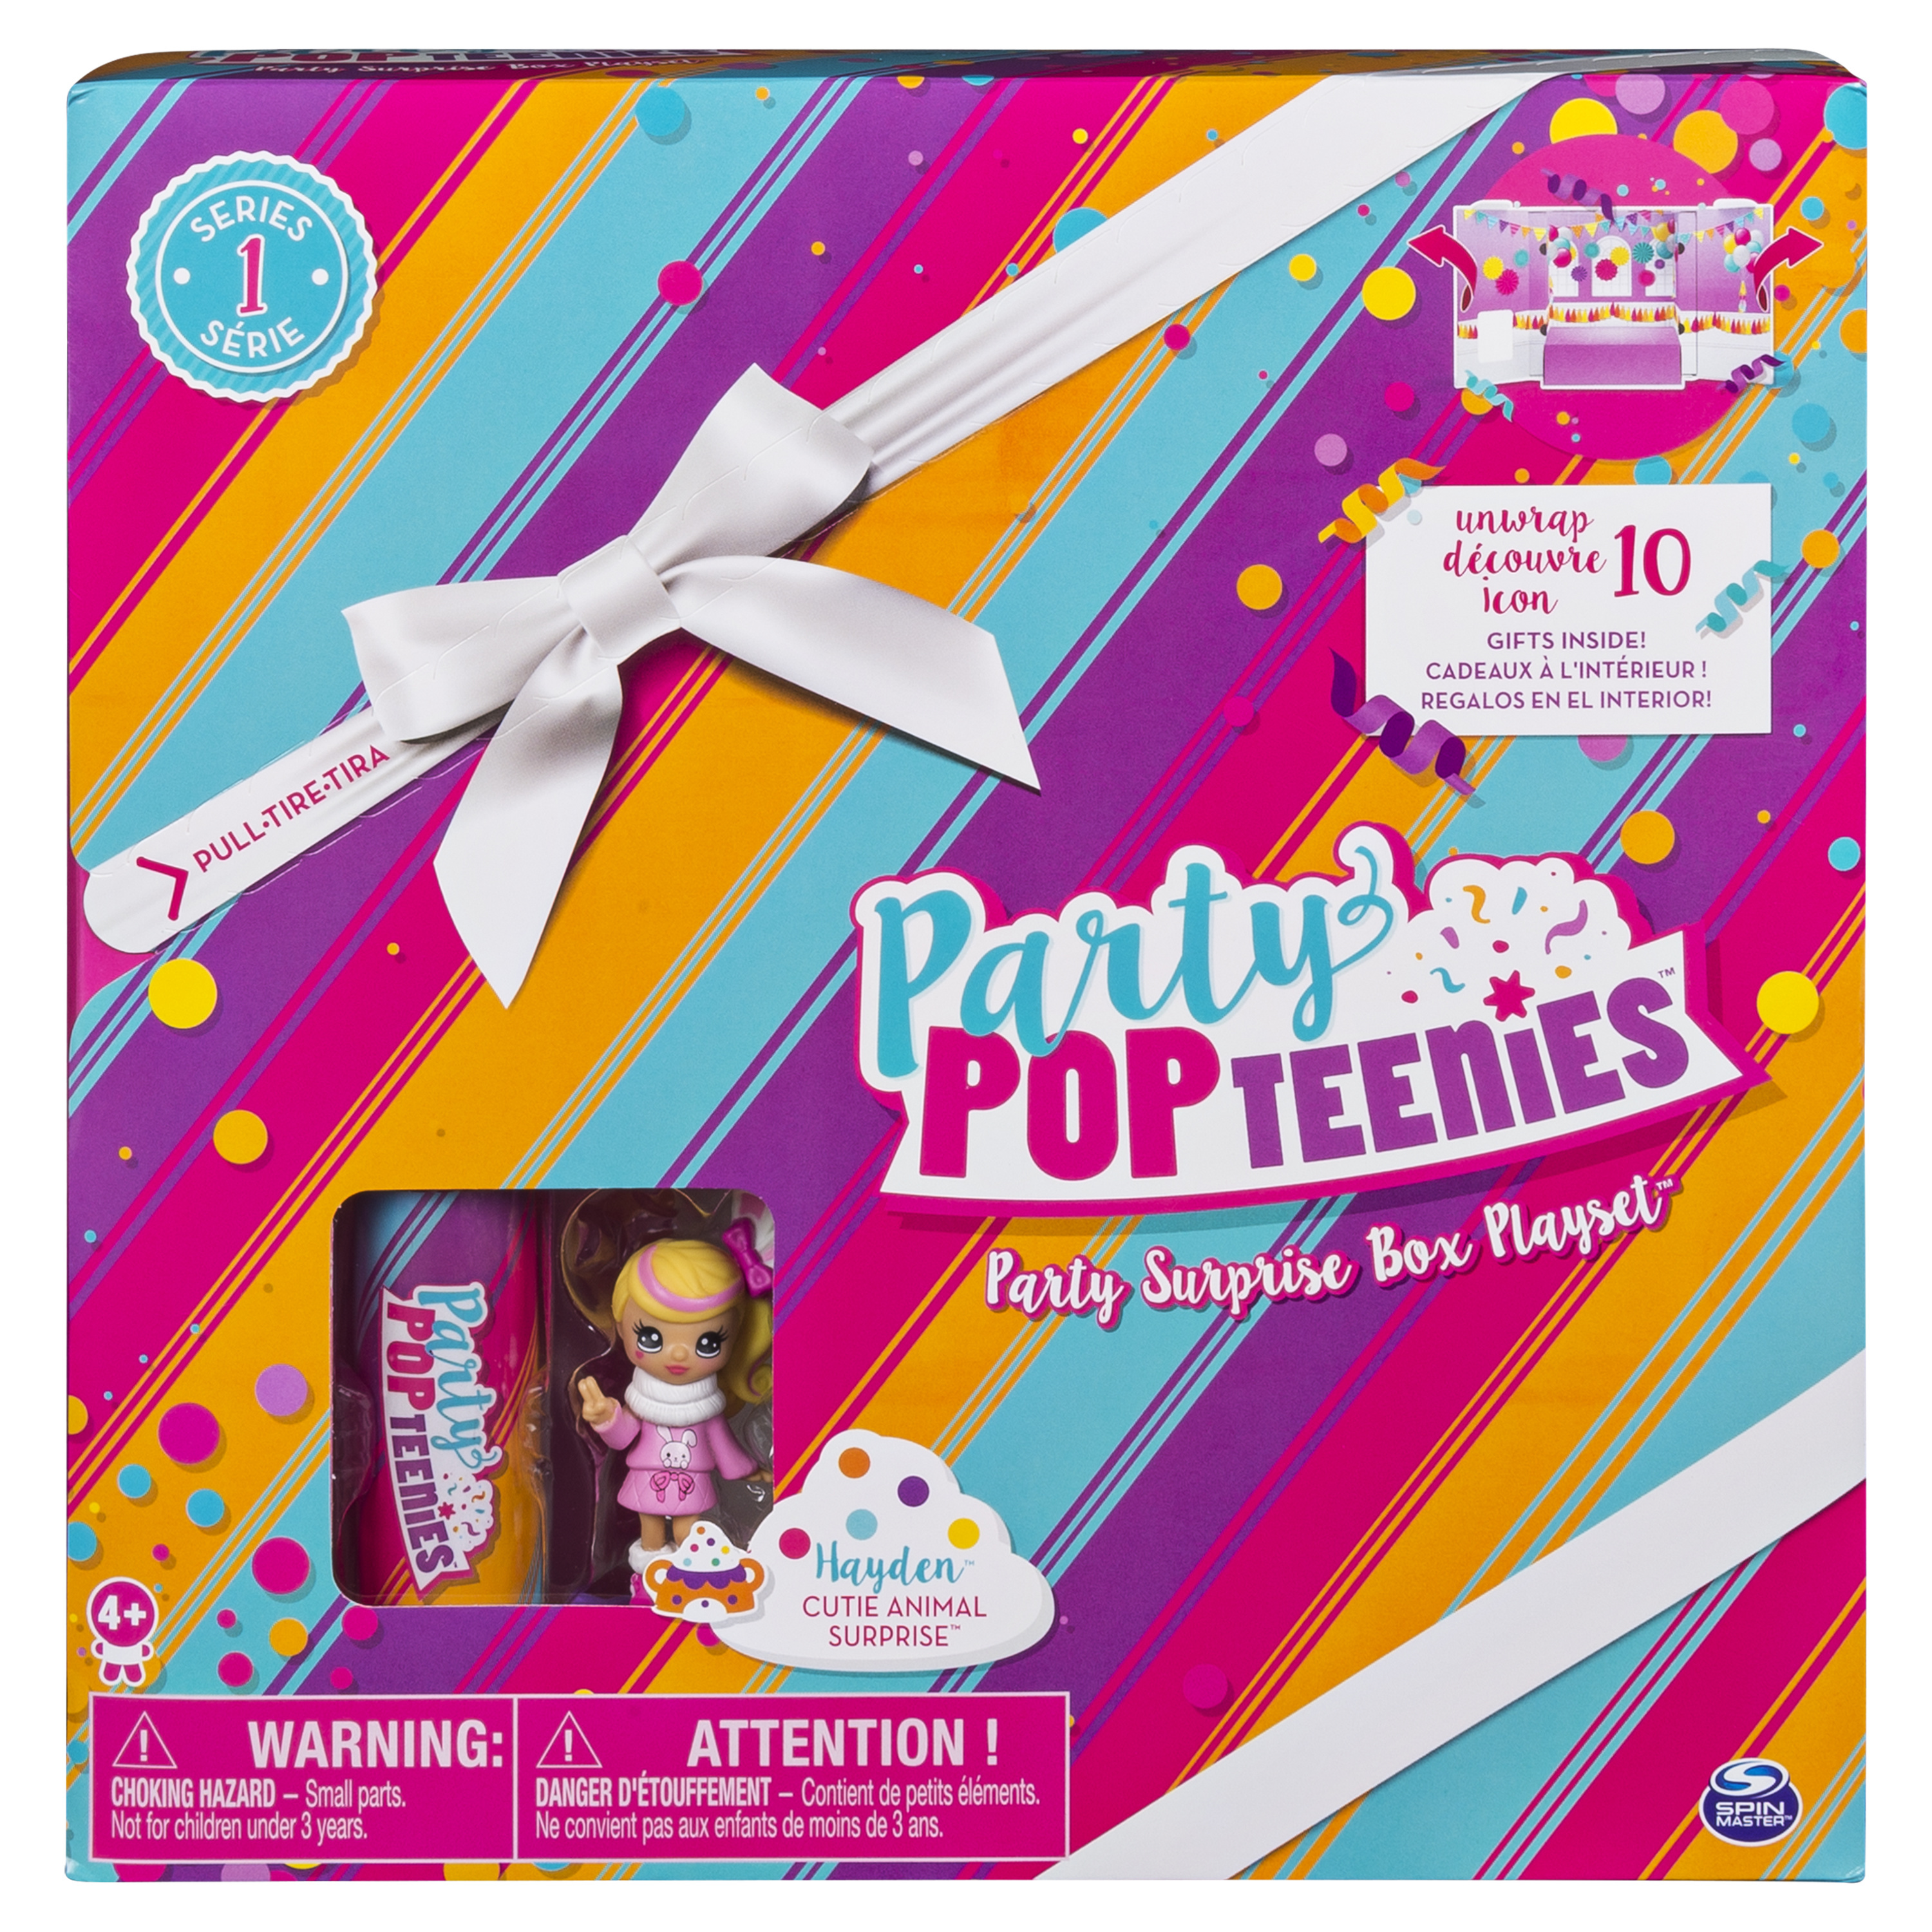 Party PopTeenies Party Surprise Box